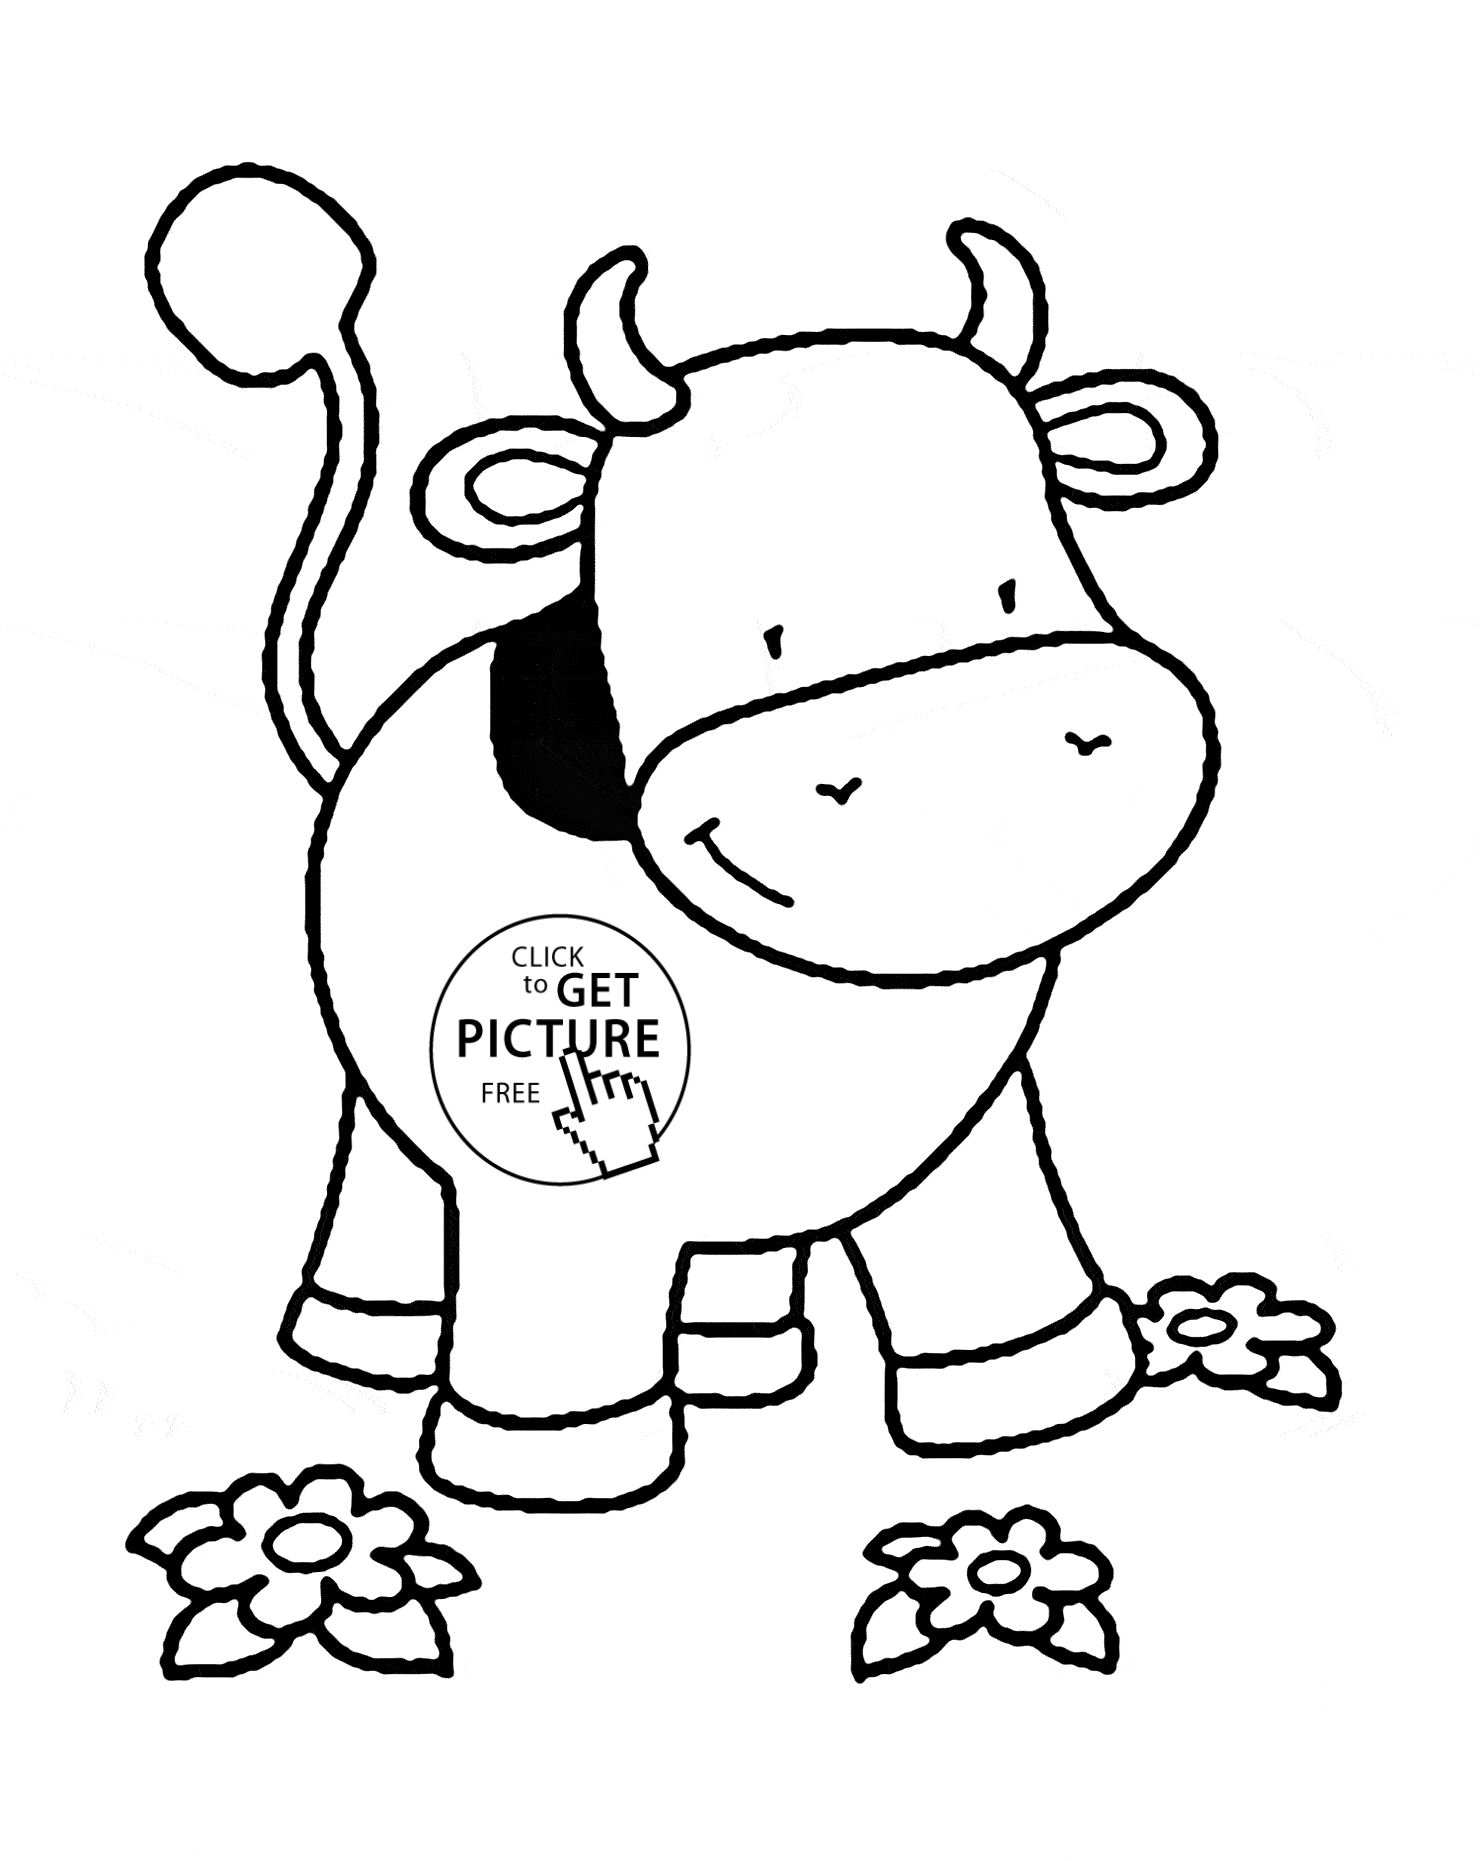 Small Cow coloring page for kids, animal coloring pages printables ...